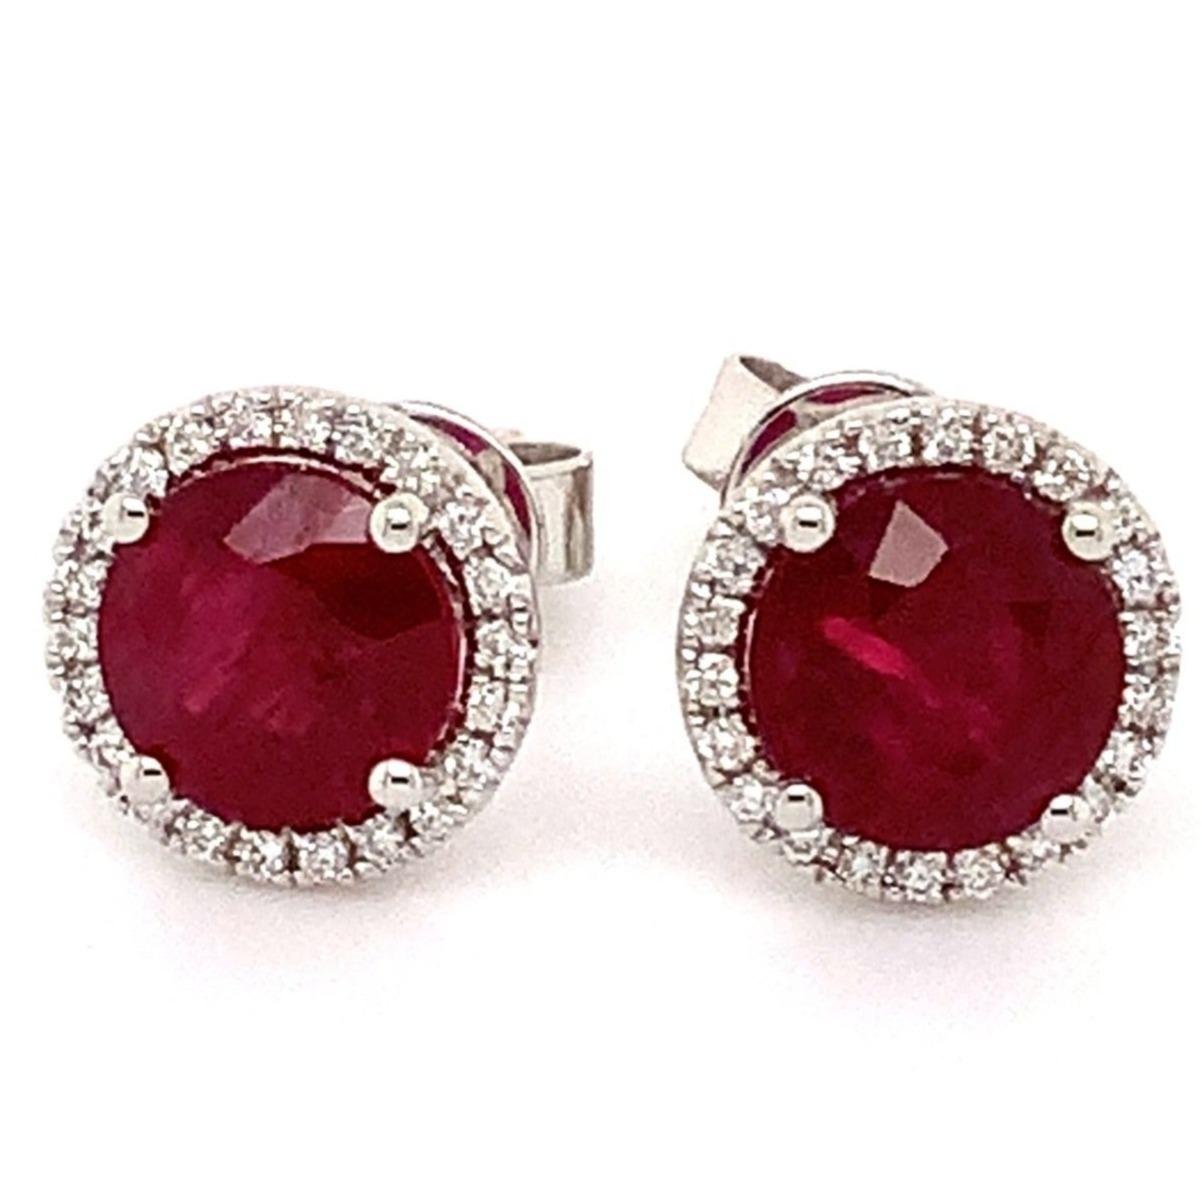 Roman + Jules Fine Quality Medium Dark Red Ruby Origin Thailand and Diamond Halo Earrings in 18 Kt White Gold.
6 mm Round Ruby stones 
2 Round Rubies Equal 2.21 cts. tw.
44 Round Brilliant Cut Diamonds 0.22 tw
G in Color SI in Clarity
8 mm in